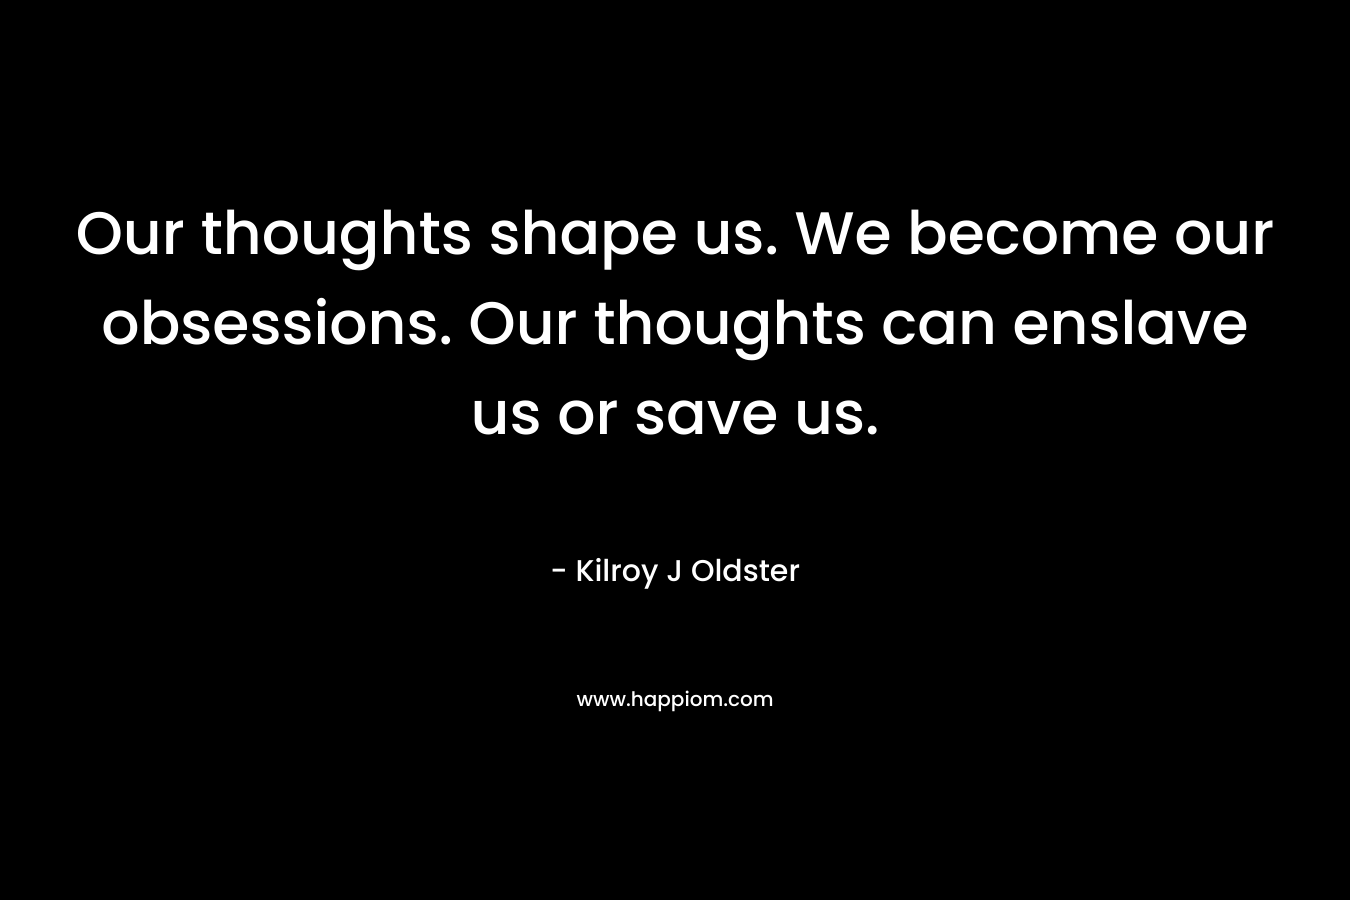 Our thoughts shape us. We become our obsessions. Our thoughts can enslave us or save us.